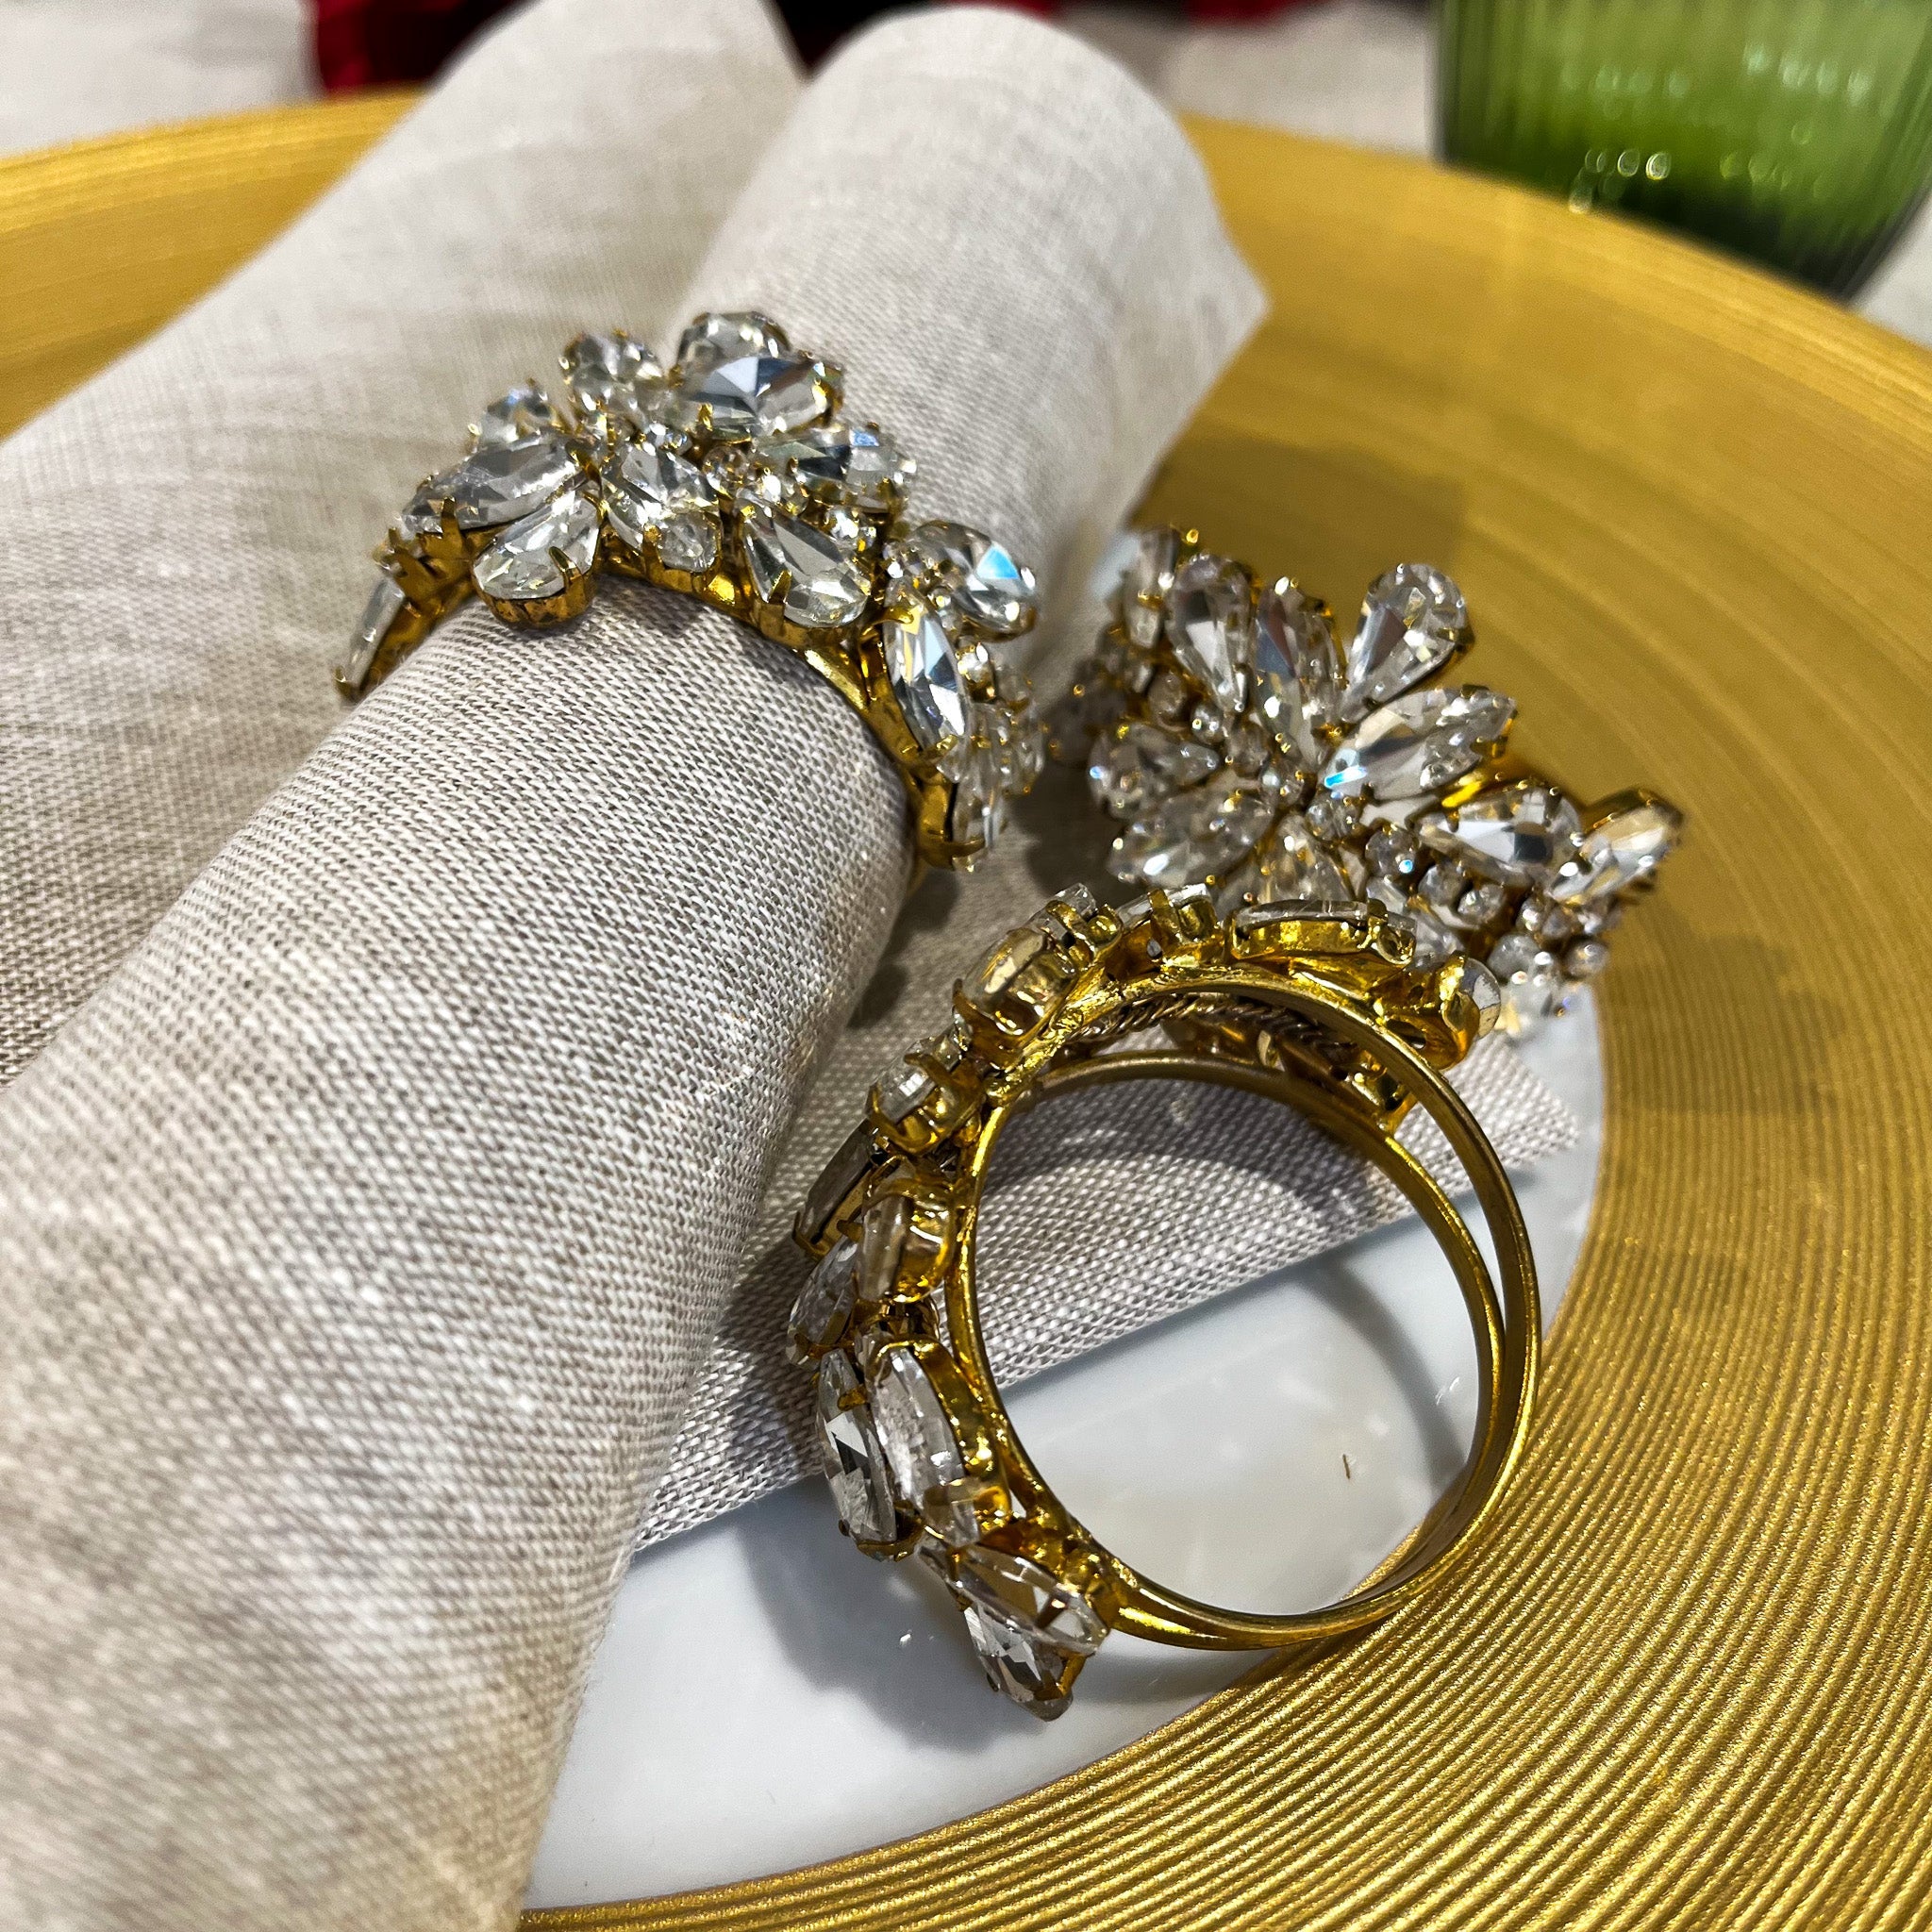 "GIGLIO" Crystal Napkins ring